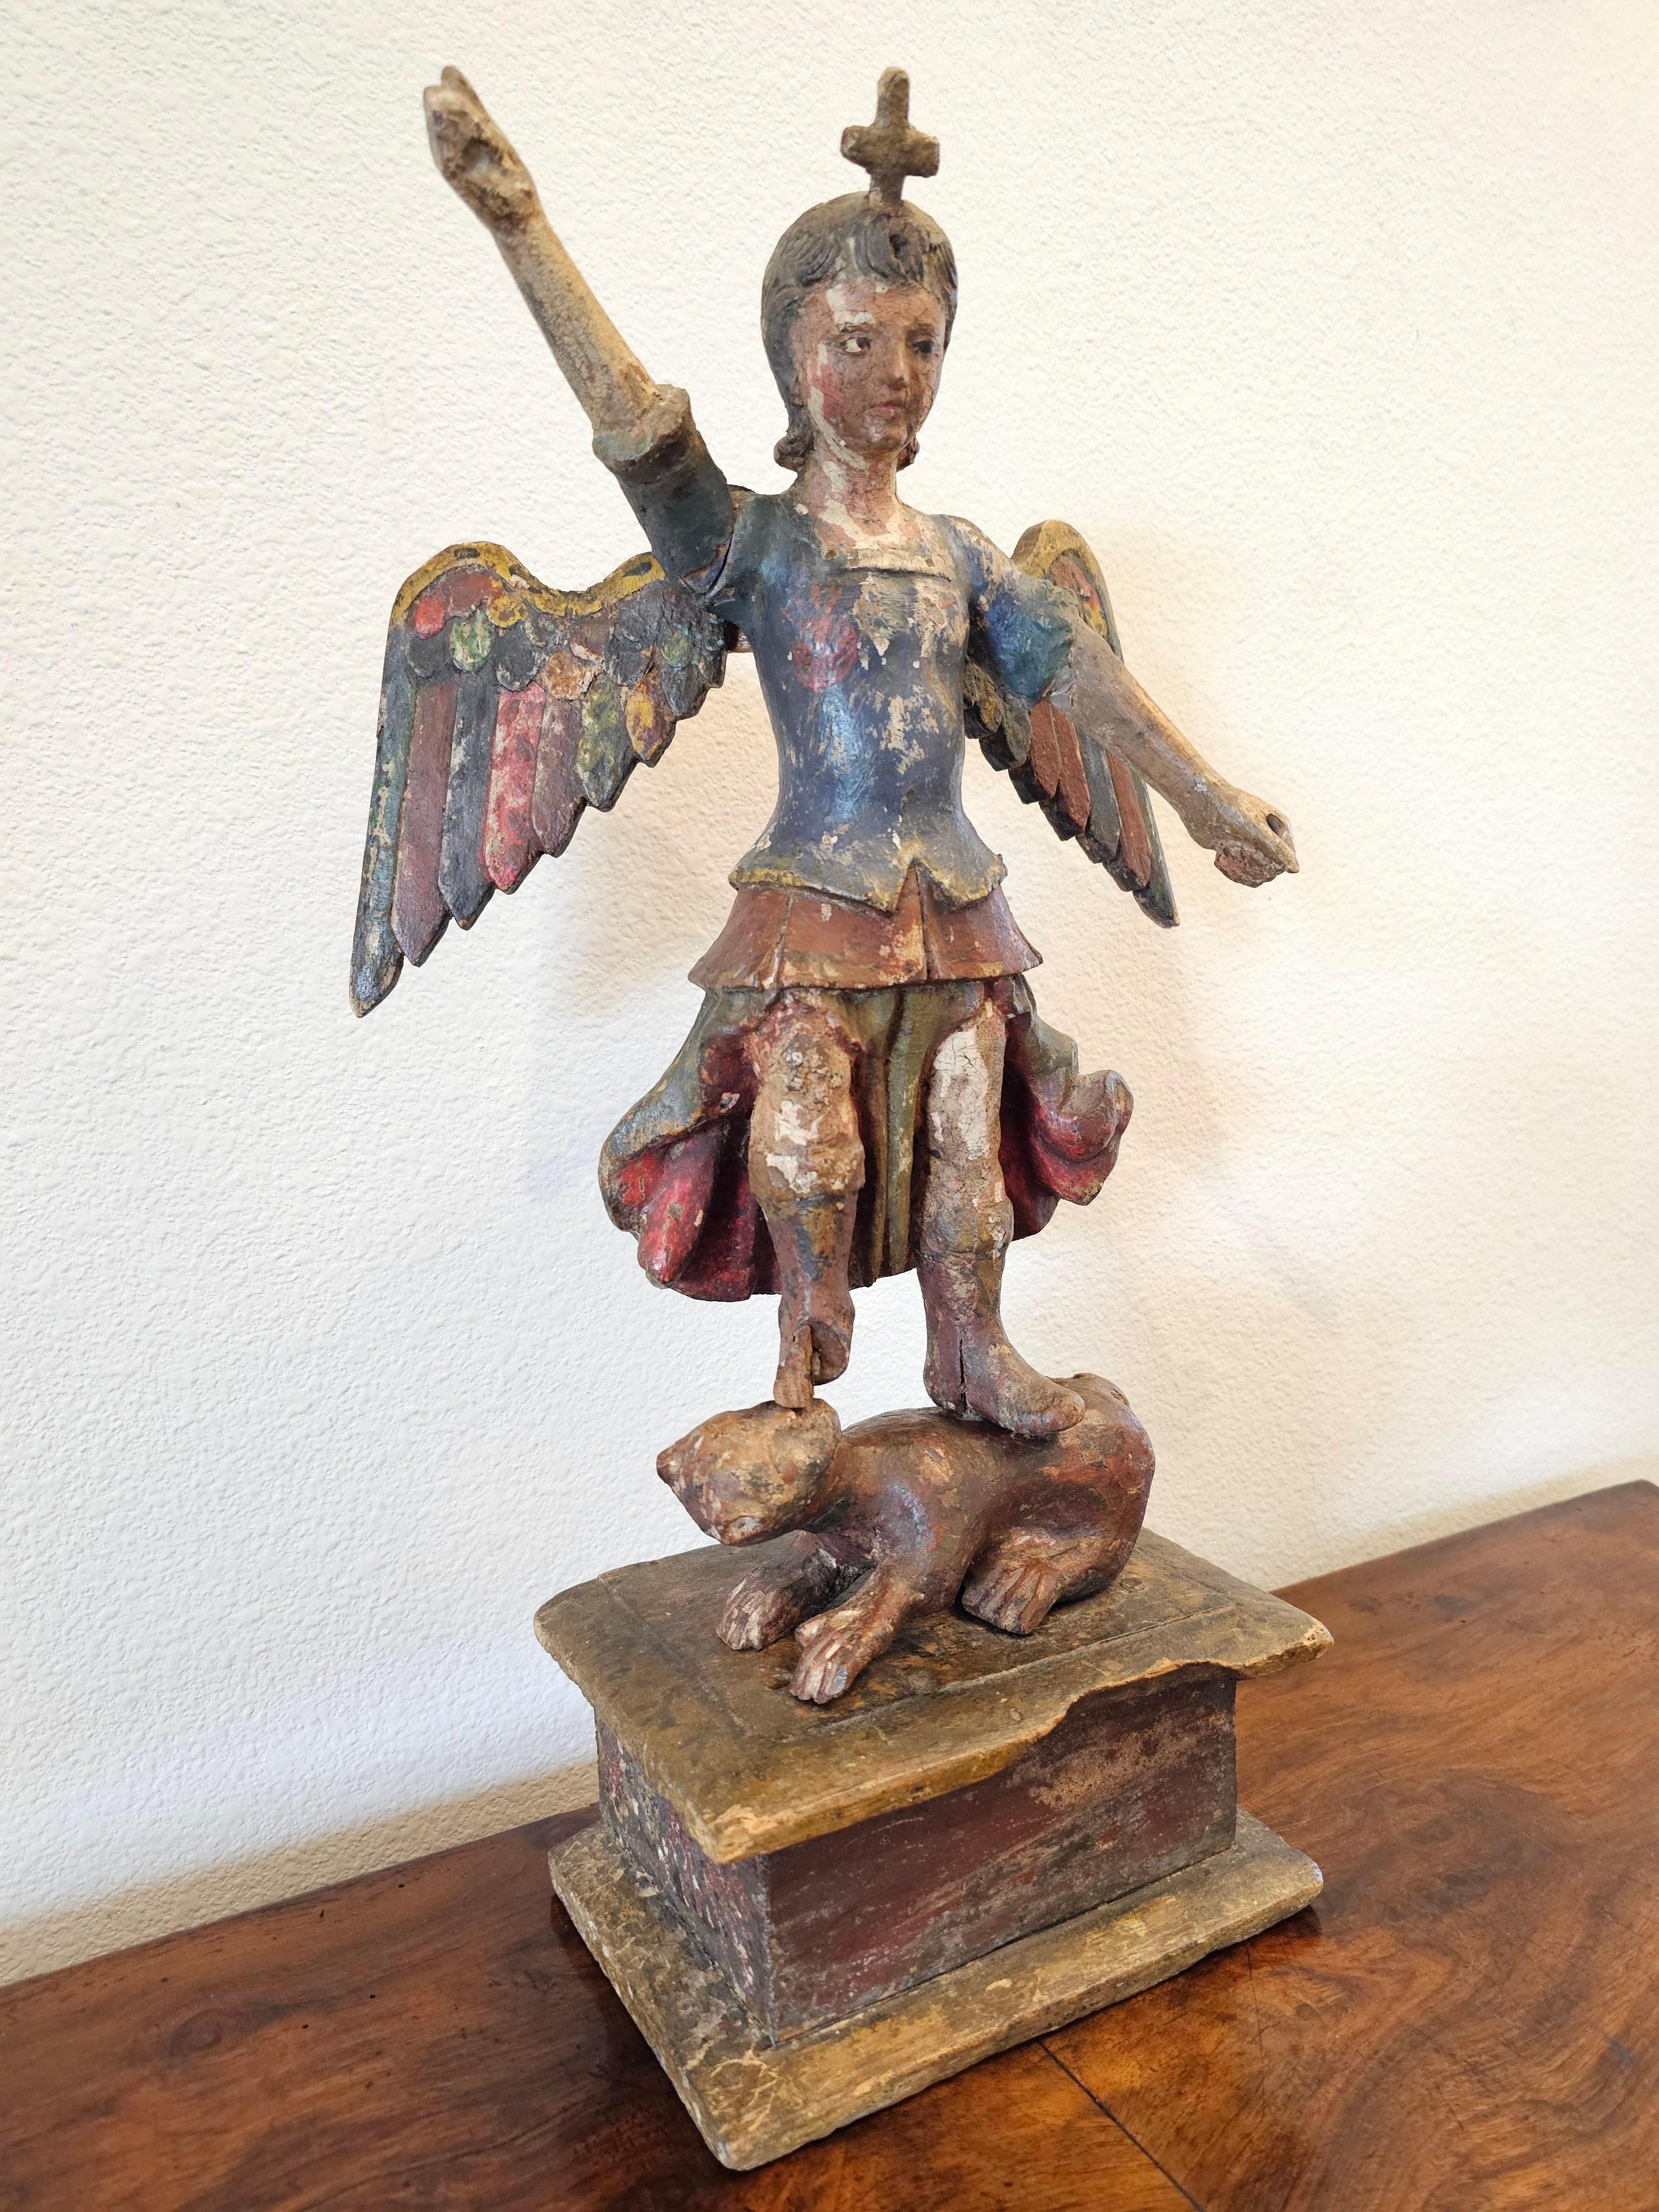 A wonderful rare large hand carved and painted Spanish Colonial Mexican santo altar figure, Saint Michael the Archangel standing over defeated Satan, circa 1800

Hand-crafted in New Spain (present day Mexico) in the early 19th century,